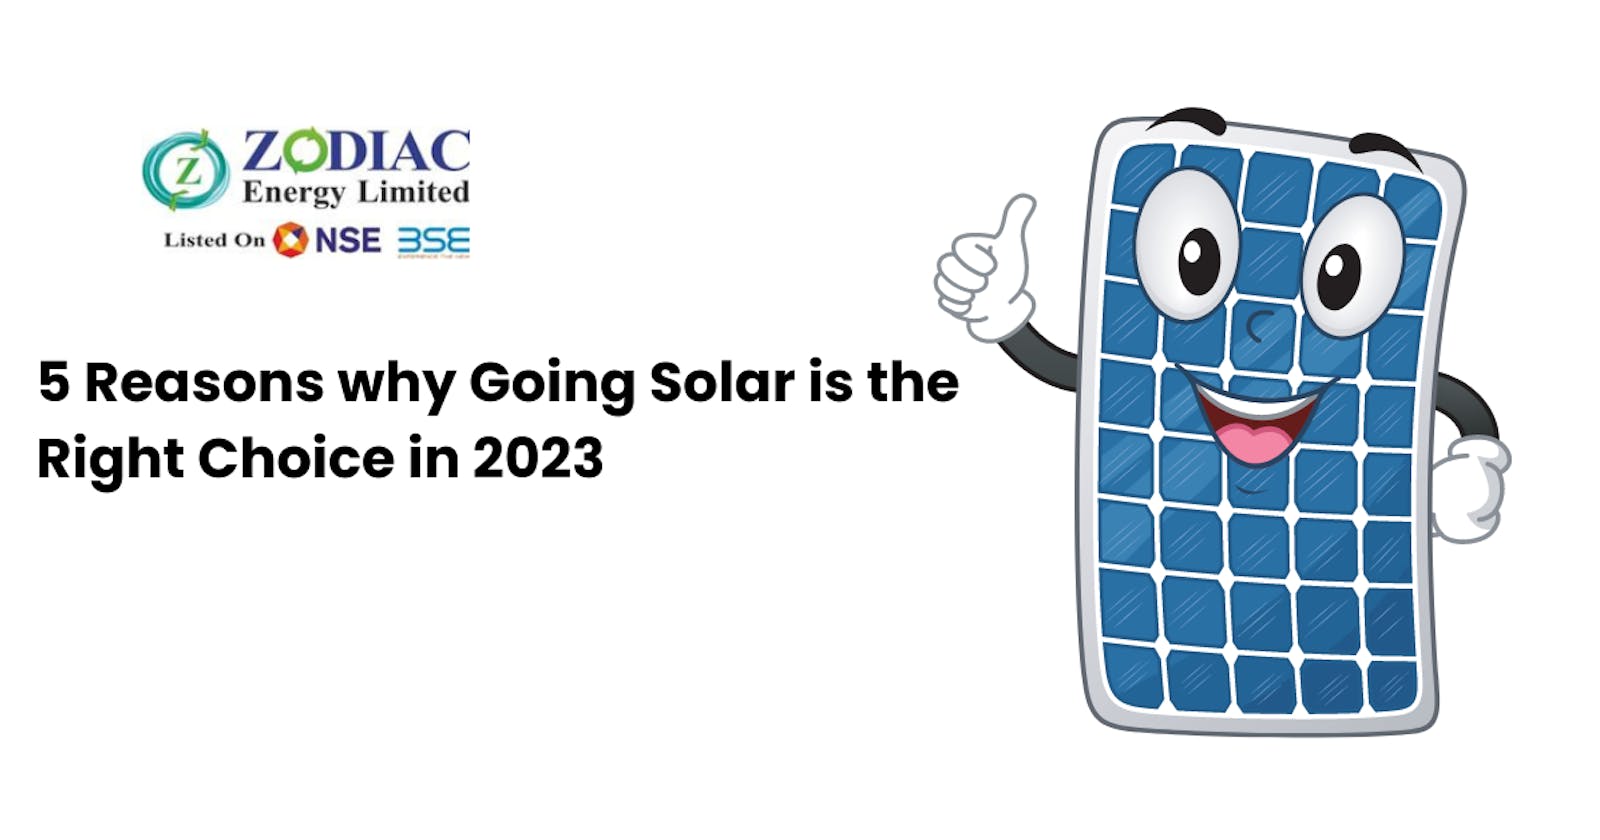 5 Reasons why Going Solar is the Right Choice in 2023